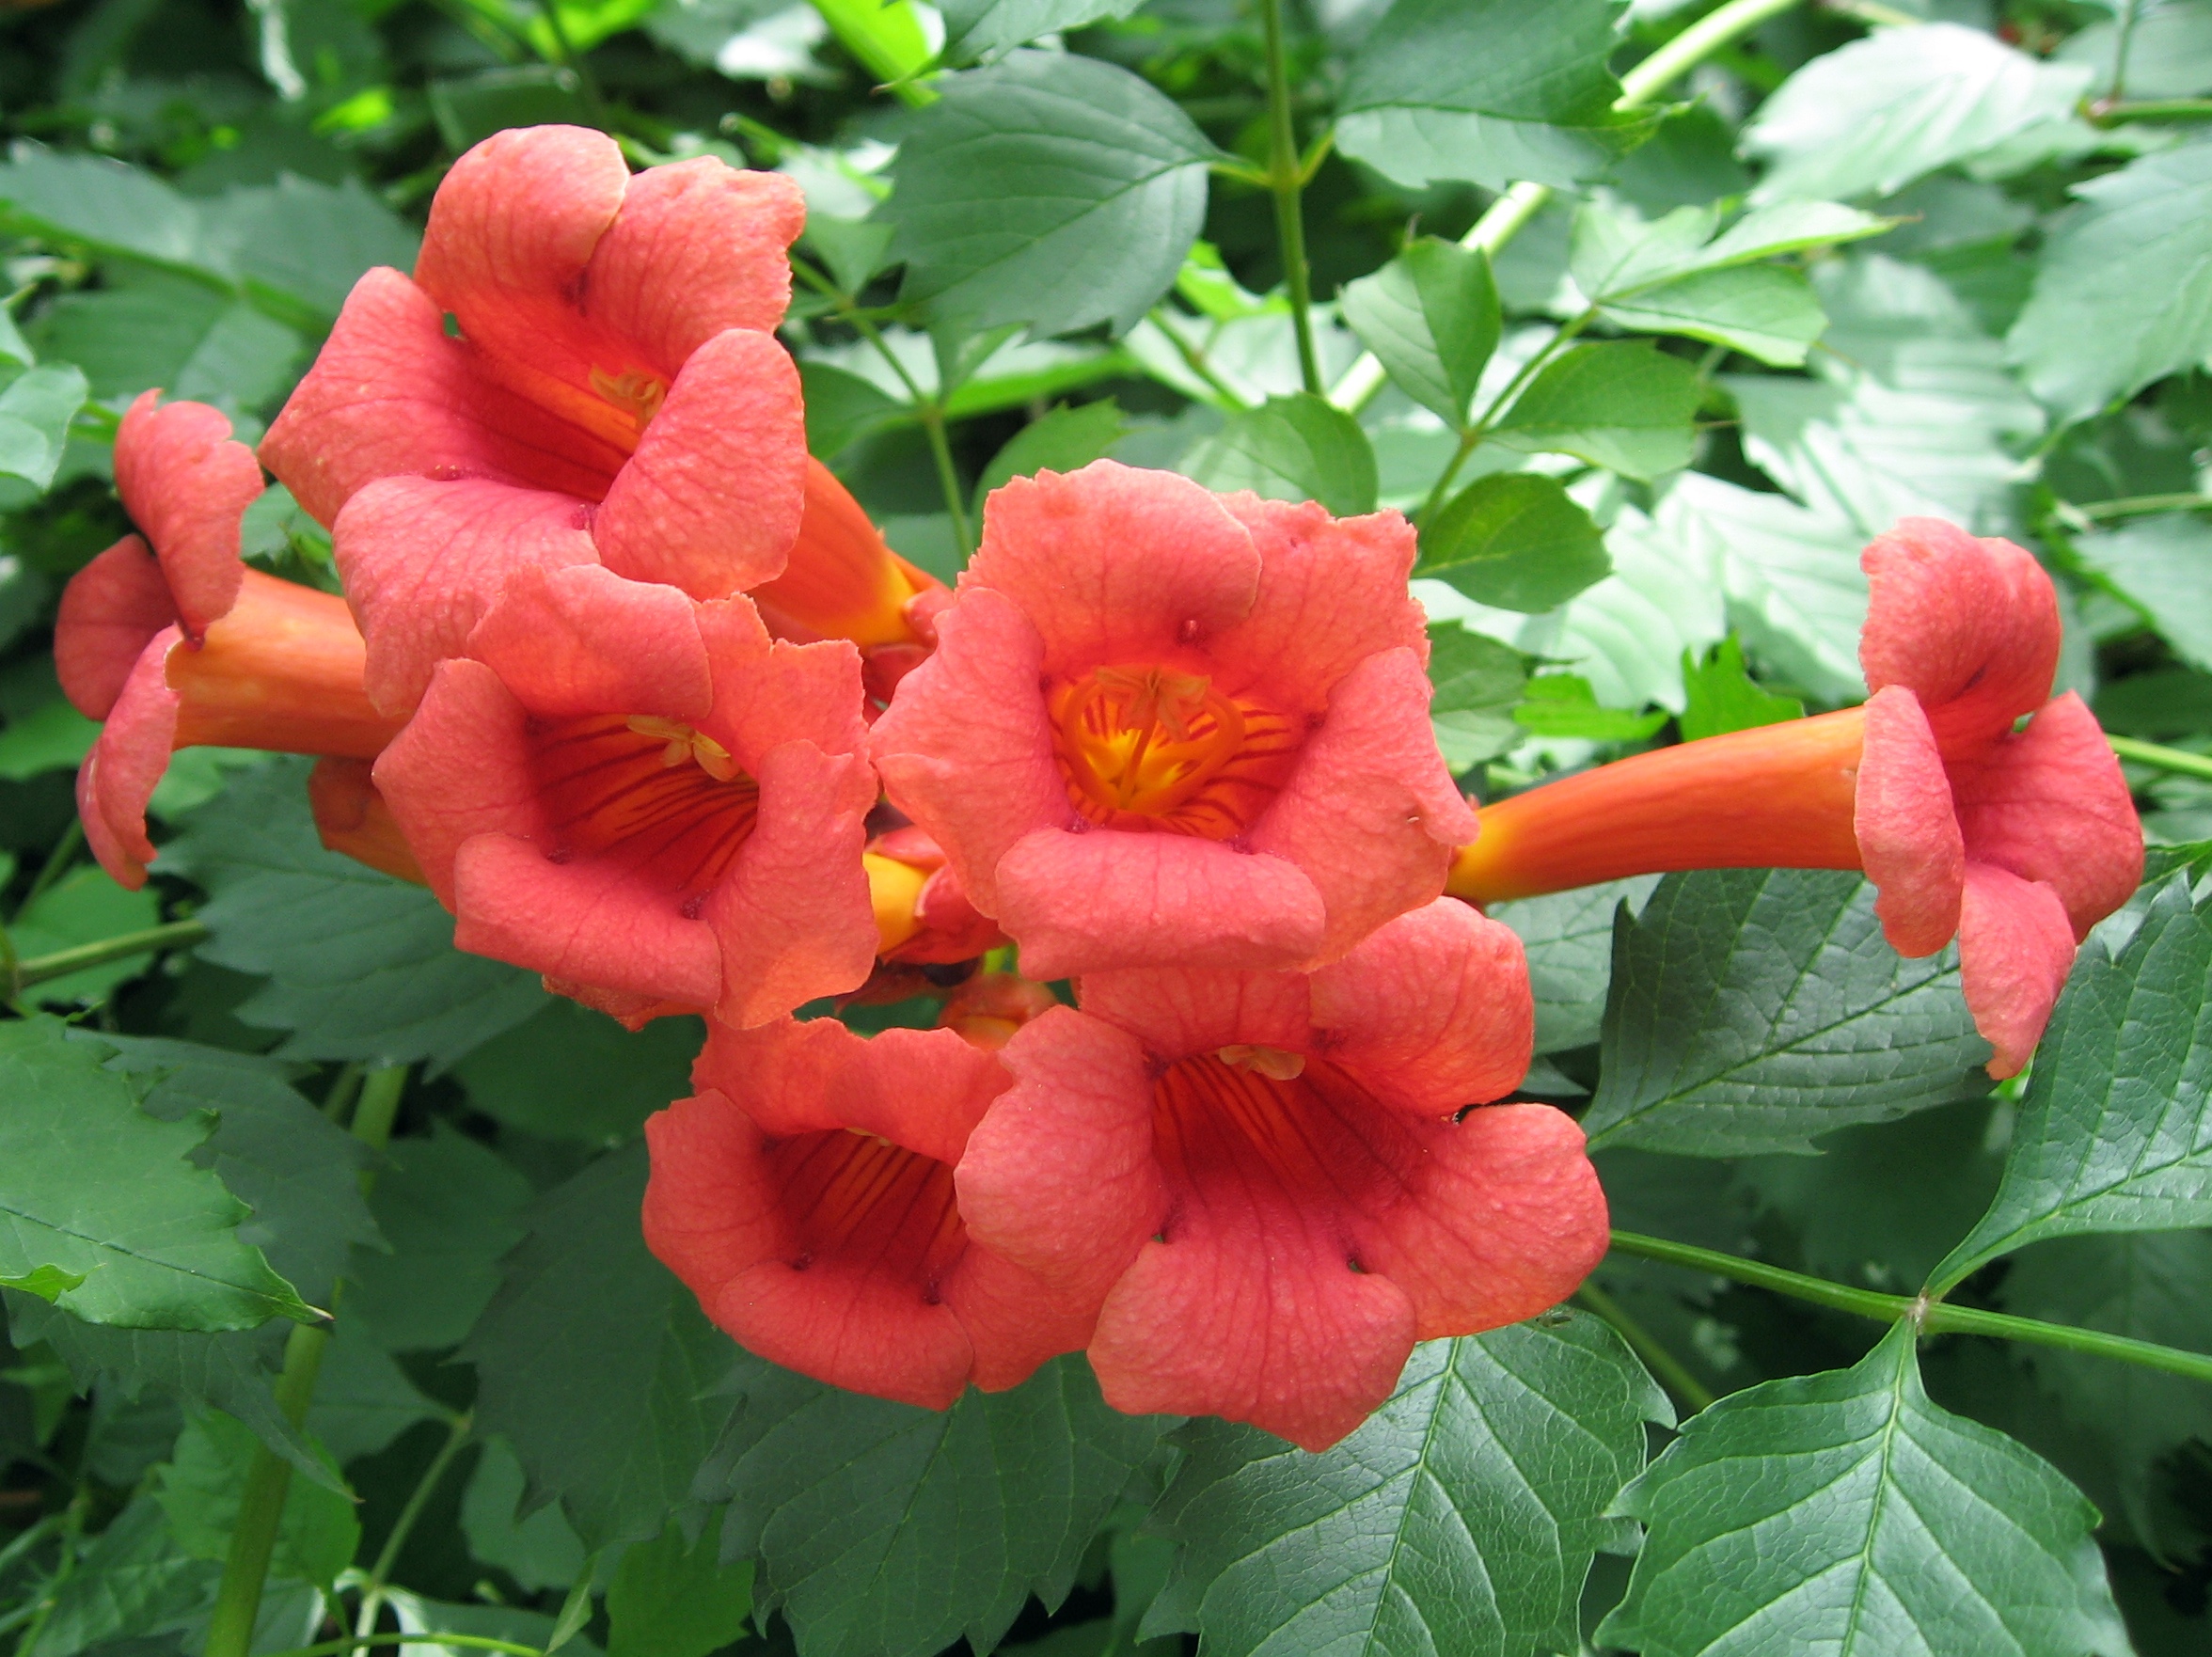 Trumpet creeper Definition & Meaning - Merriam-Webster